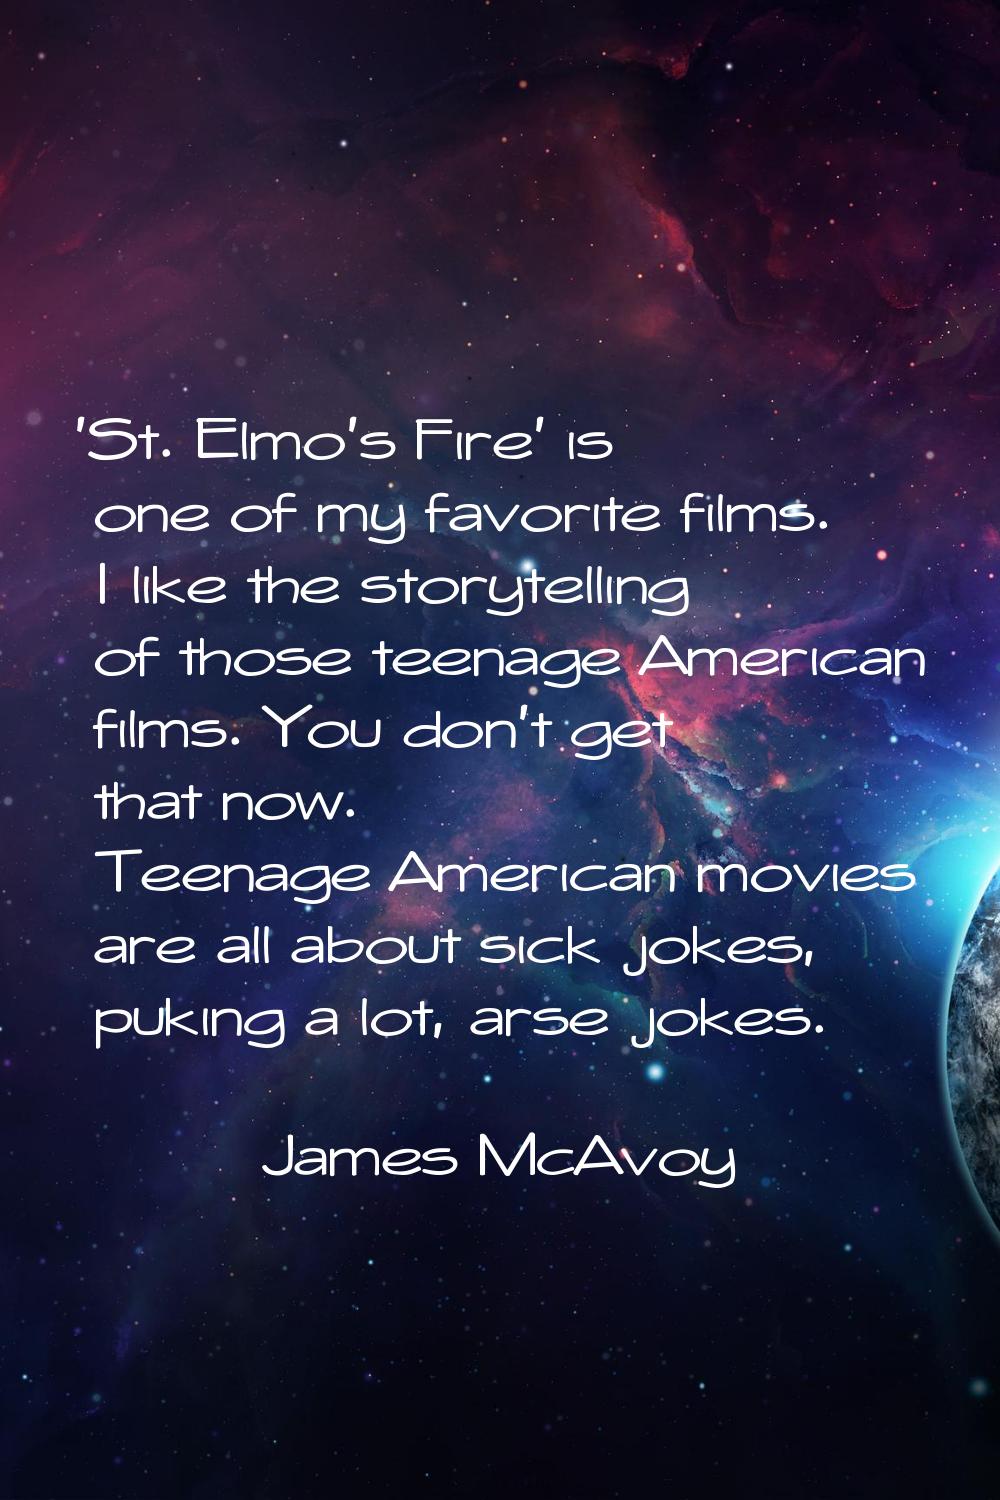 'St. Elmo's Fire' is one of my favorite films. I like the storytelling of those teenage American fi